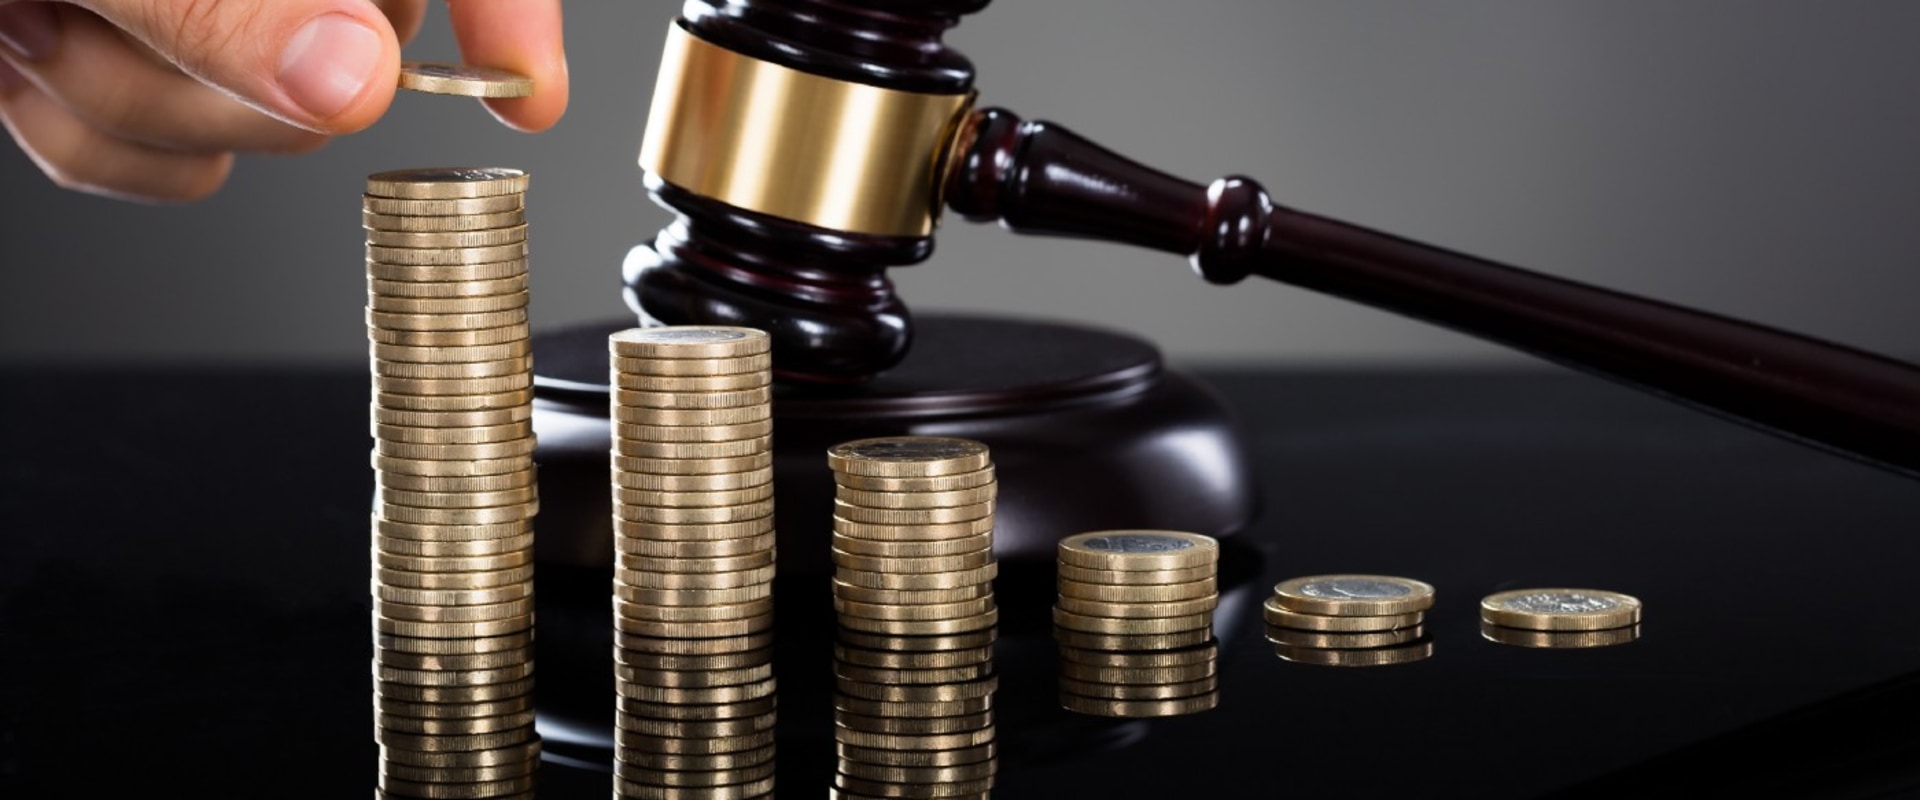 What is the most money awarded in a lawsuit?